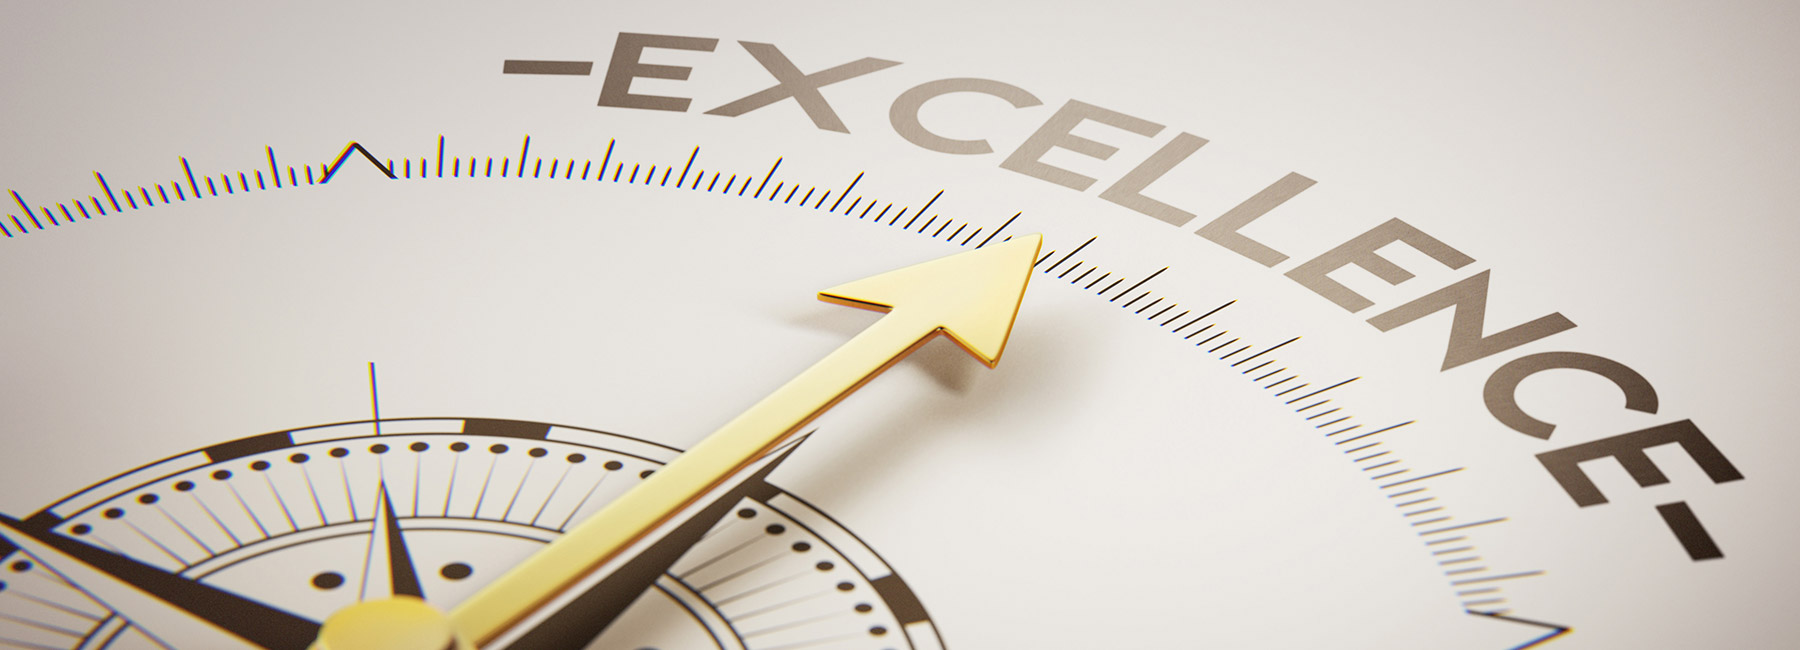 A compass needle points to the word "excellence"